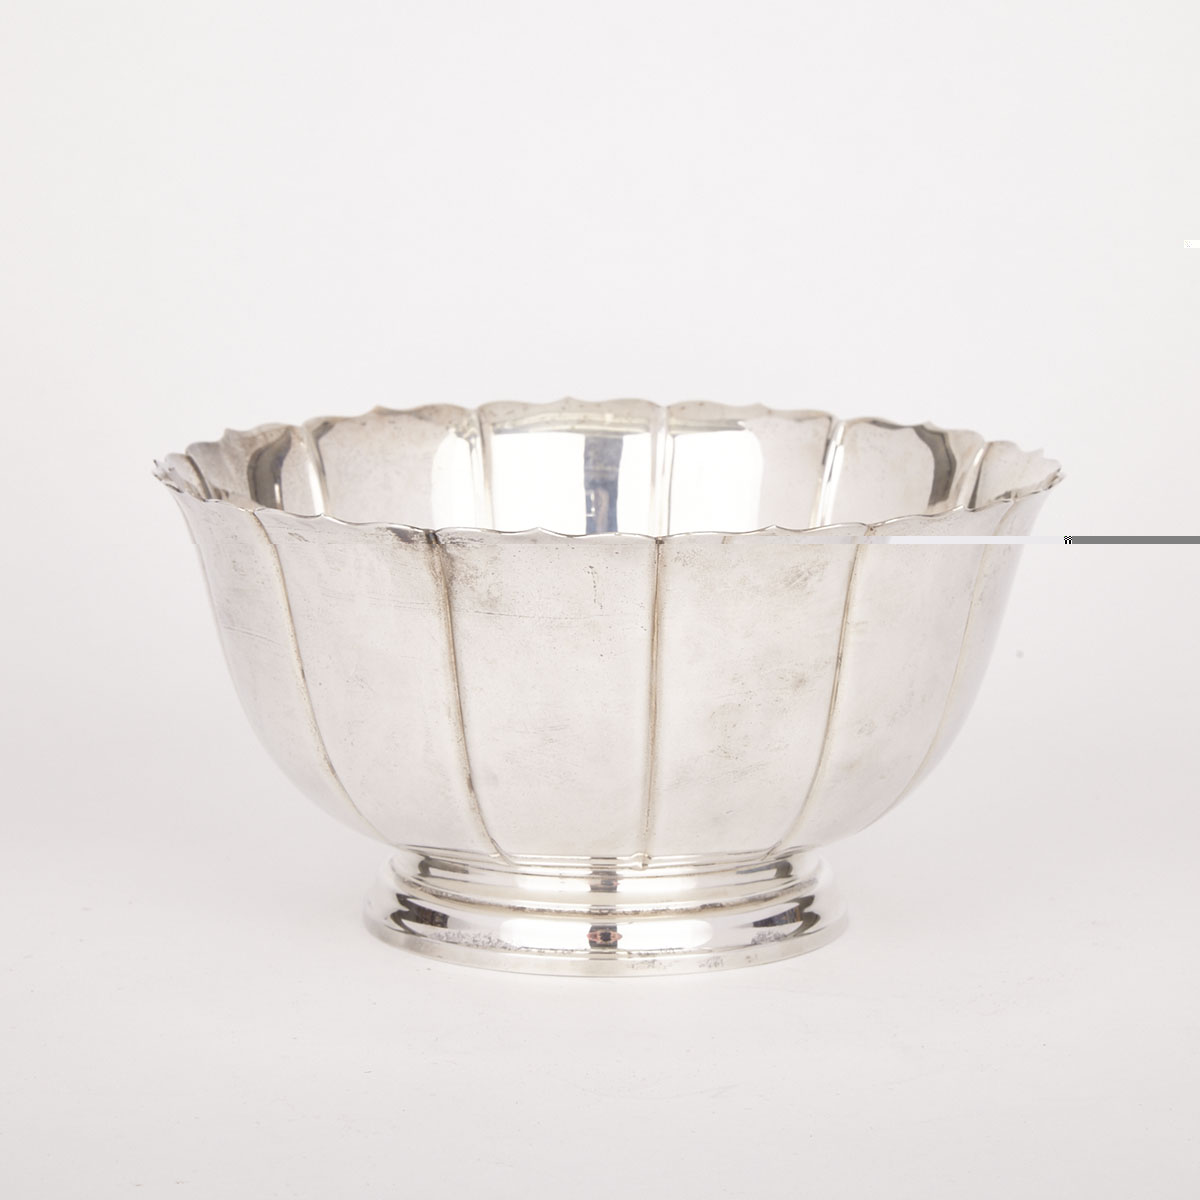 American Silver Fluted Fruit Bowl, Lunt, Greenfield, Mass., 20th century